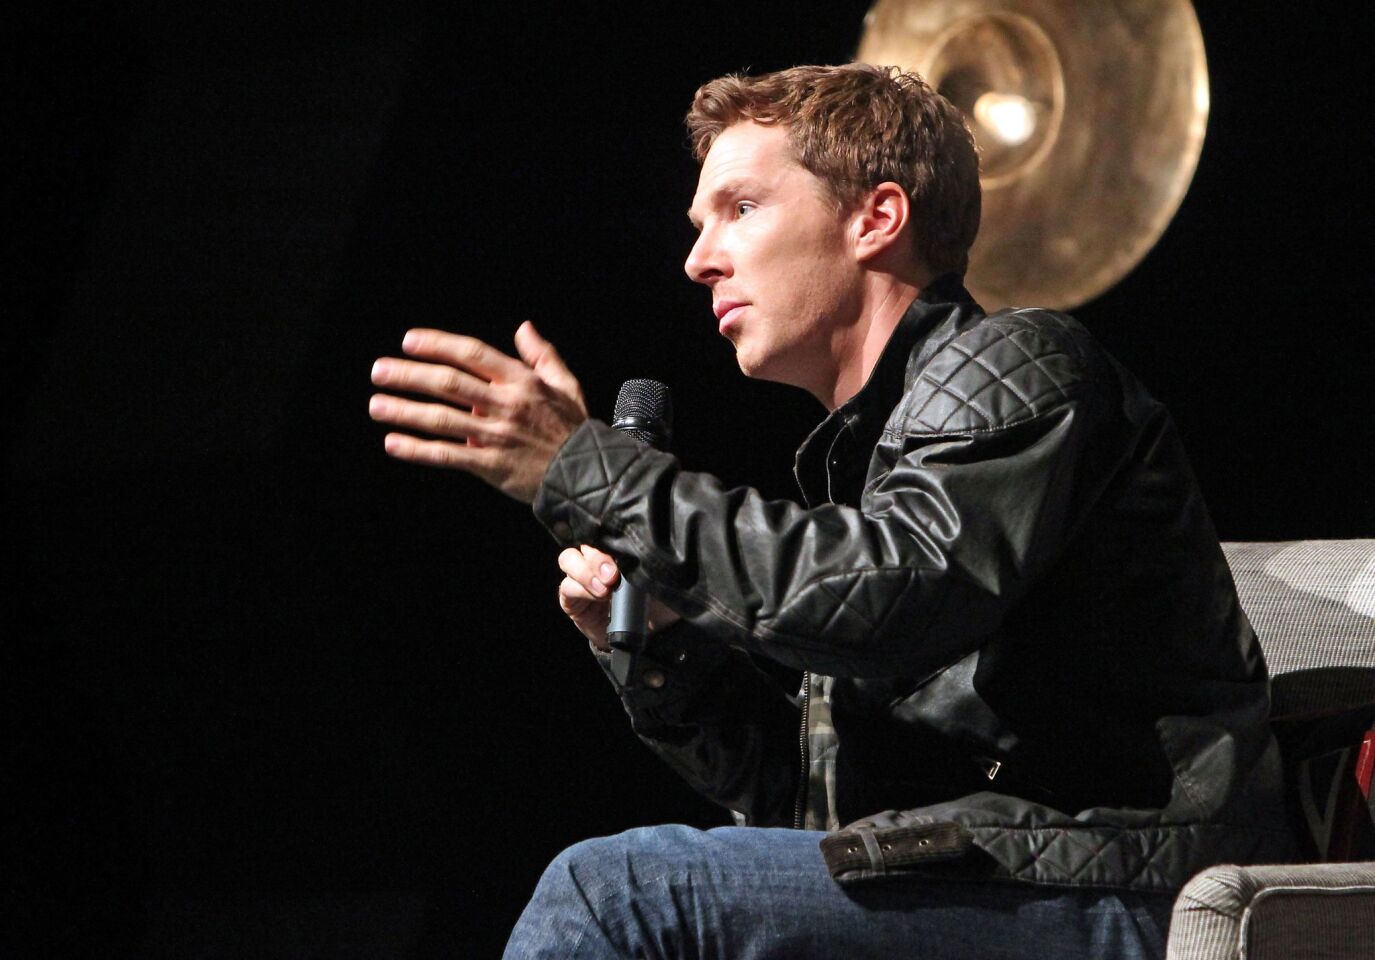 On Nov. 7, 2014, Cumberbatch took part in BAFTA L.A.'s Behind Closed Doors discussion series at the Pacific Design Center, where he talked about his career.